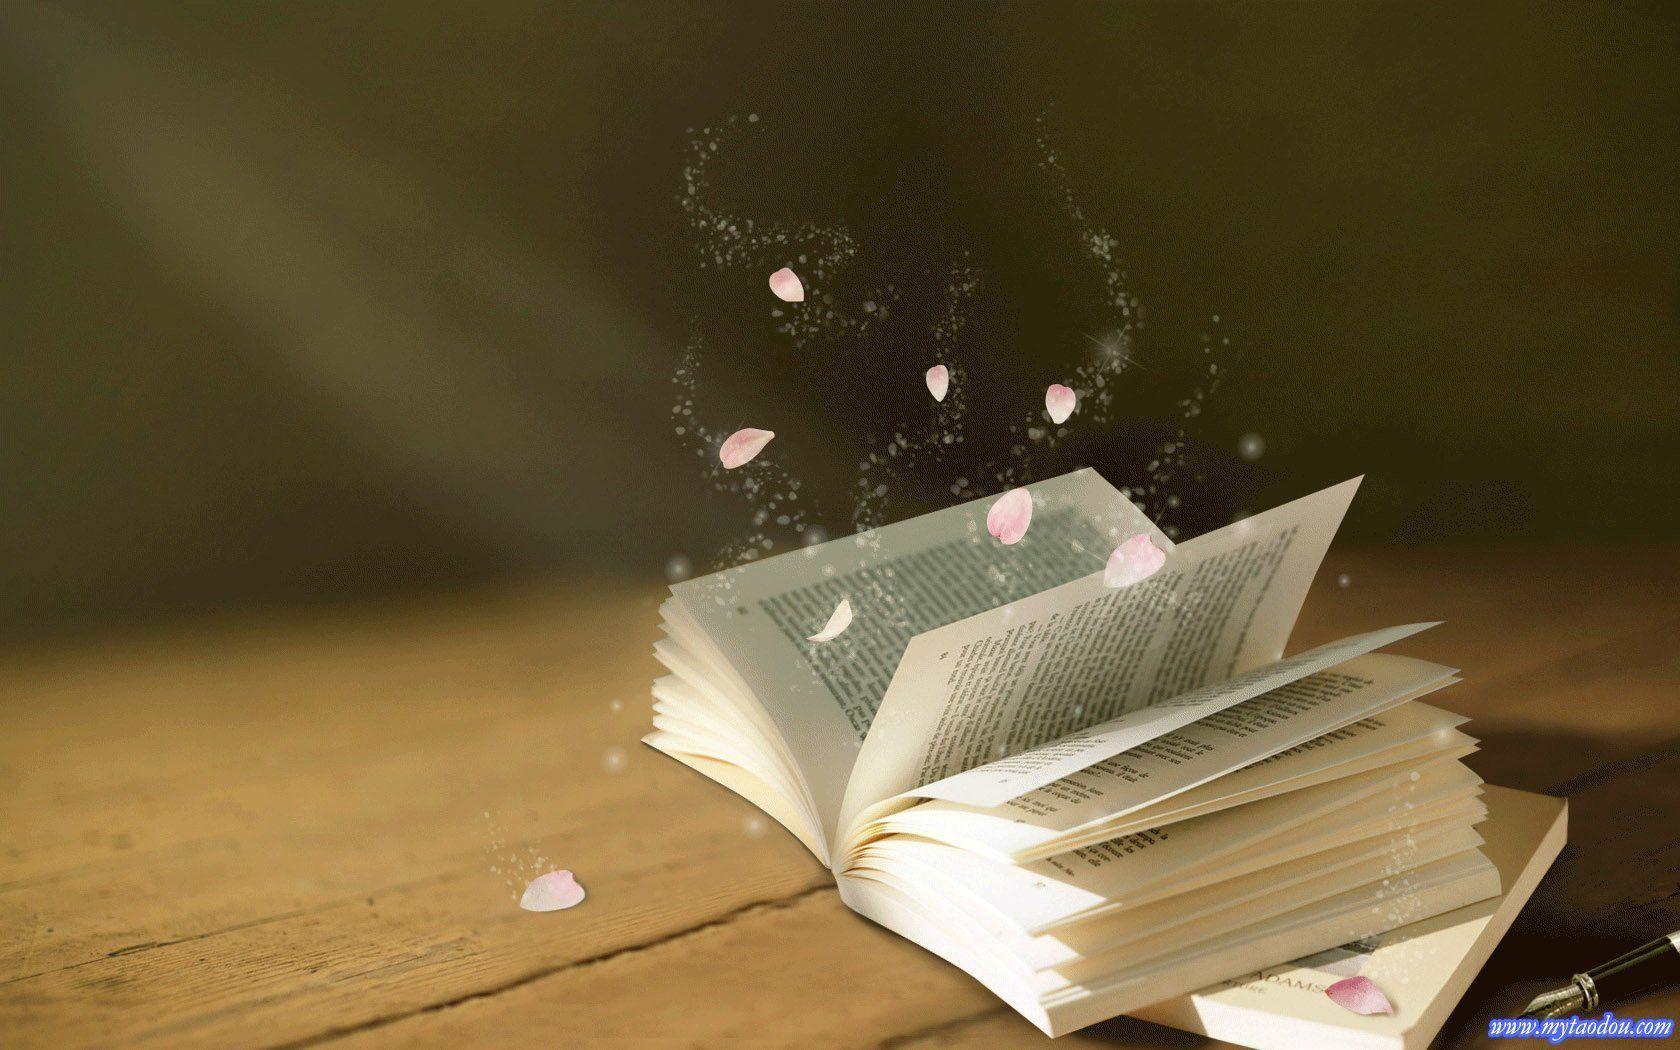 Book Wallpaper, 1680x1050. Pin and use it! :) #bookwallpaper #books